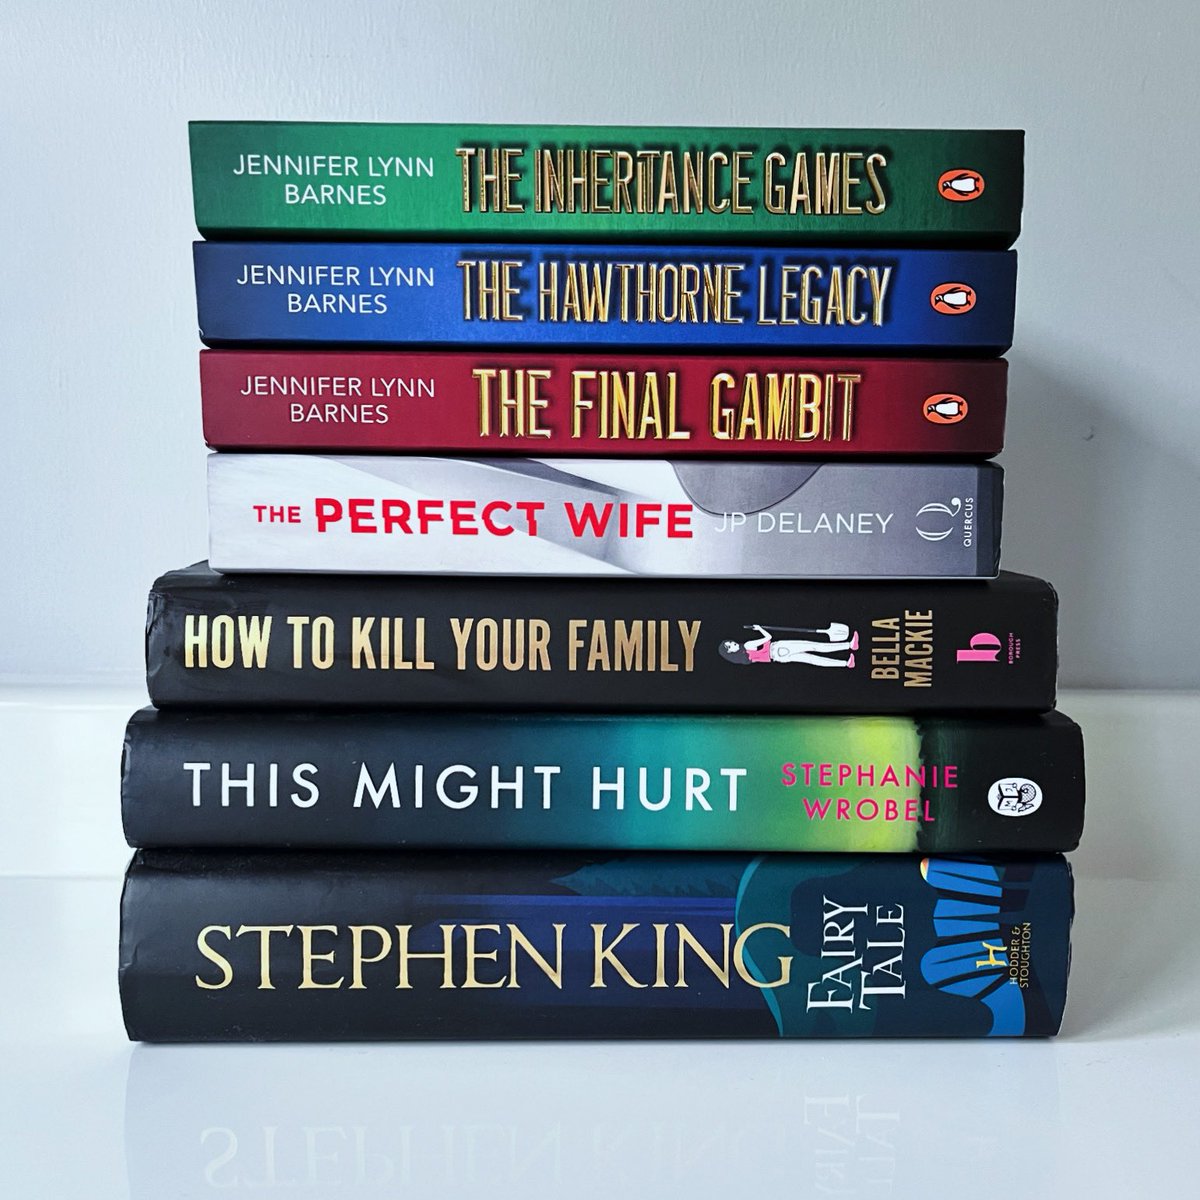 ✨BOOK HAUL ✨

Managed to get my hands on these books yesterday!

Absolutely buzzing with my stack! 

😍

#BookX #BookHaul #BookStack #BookReviewer #BookBlogger